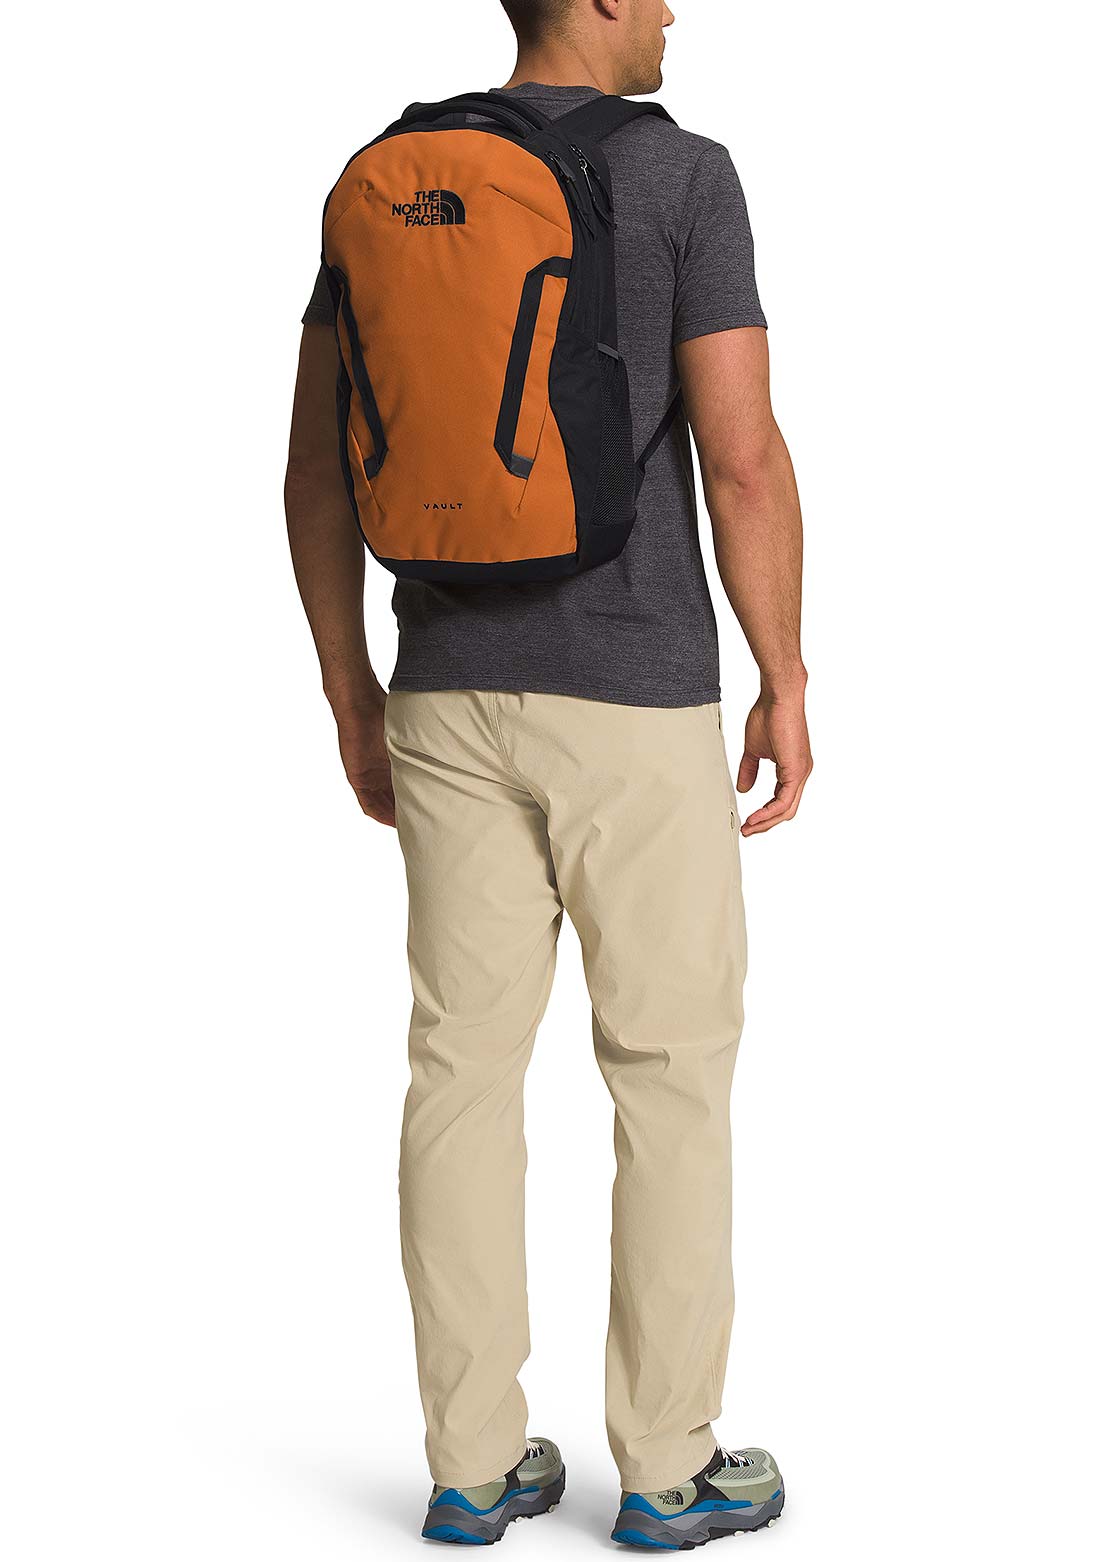 The North Face Vault Backpack - PRFO Sports